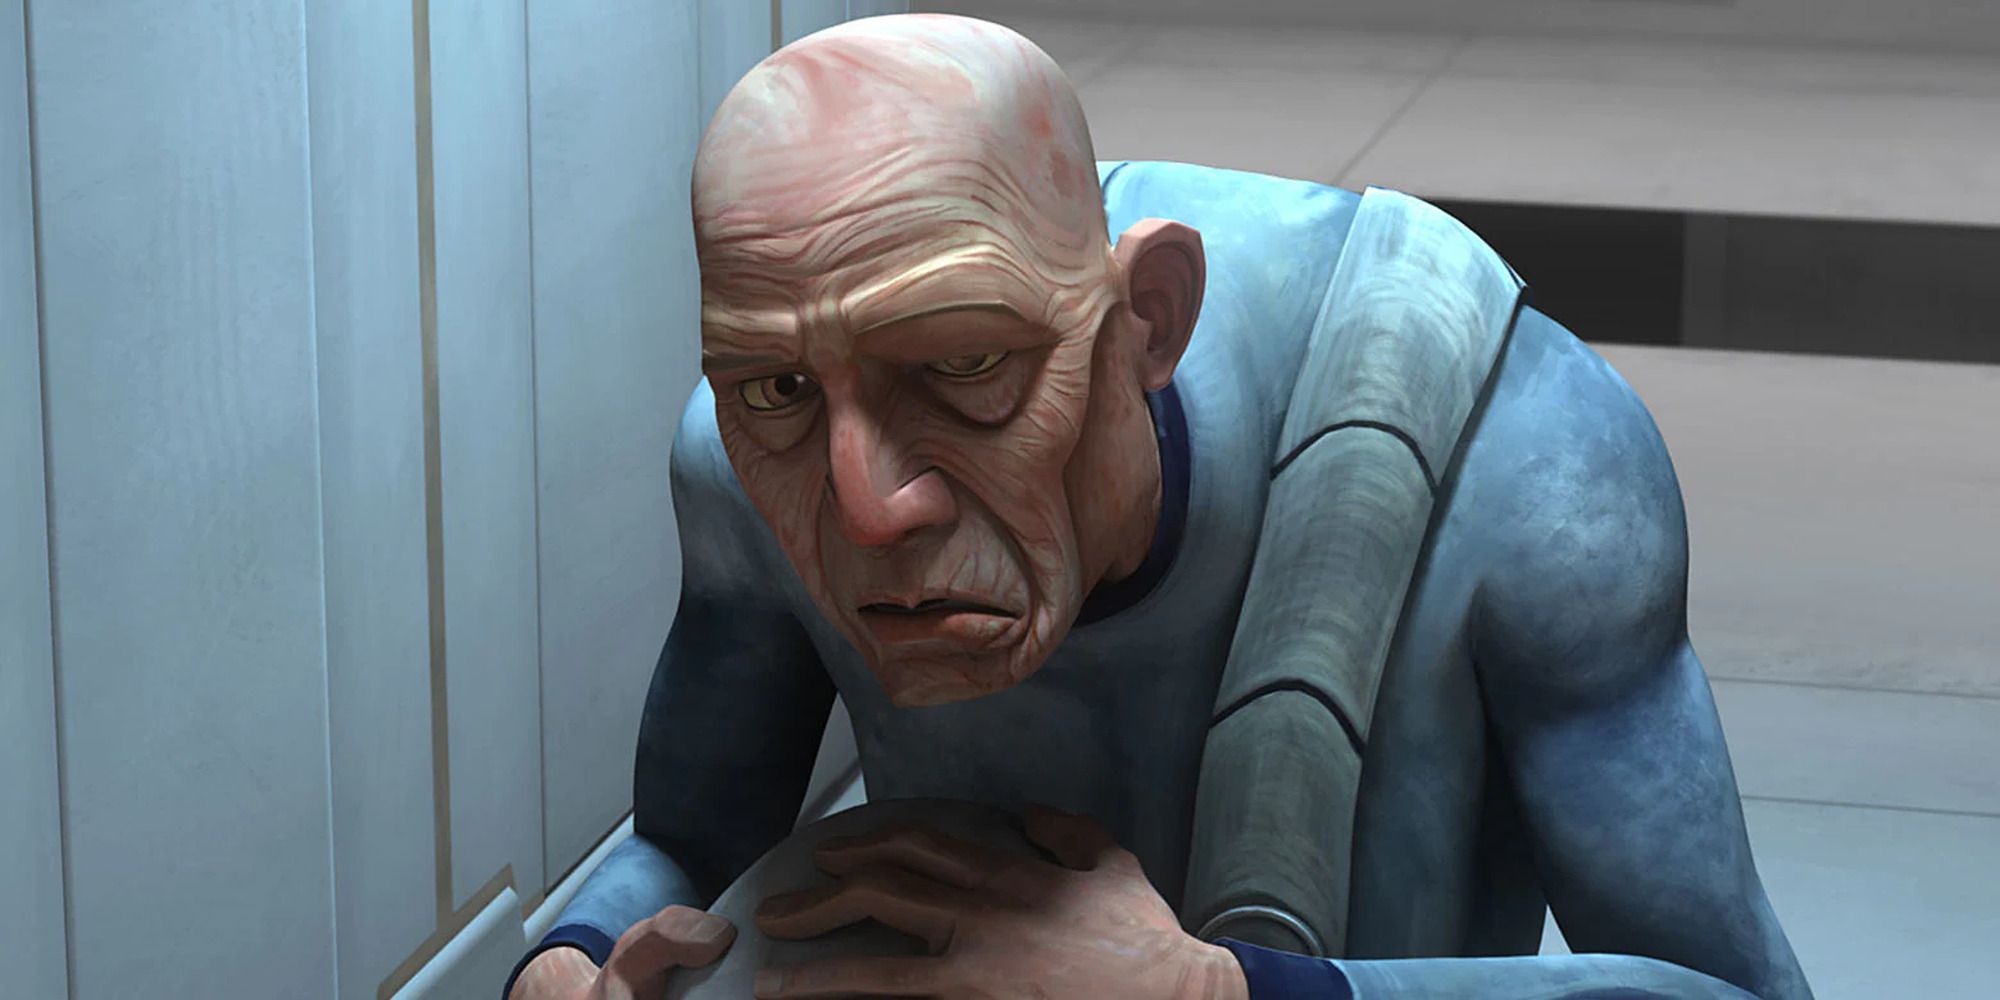 An old, malformed Clone Trooper facing the camera